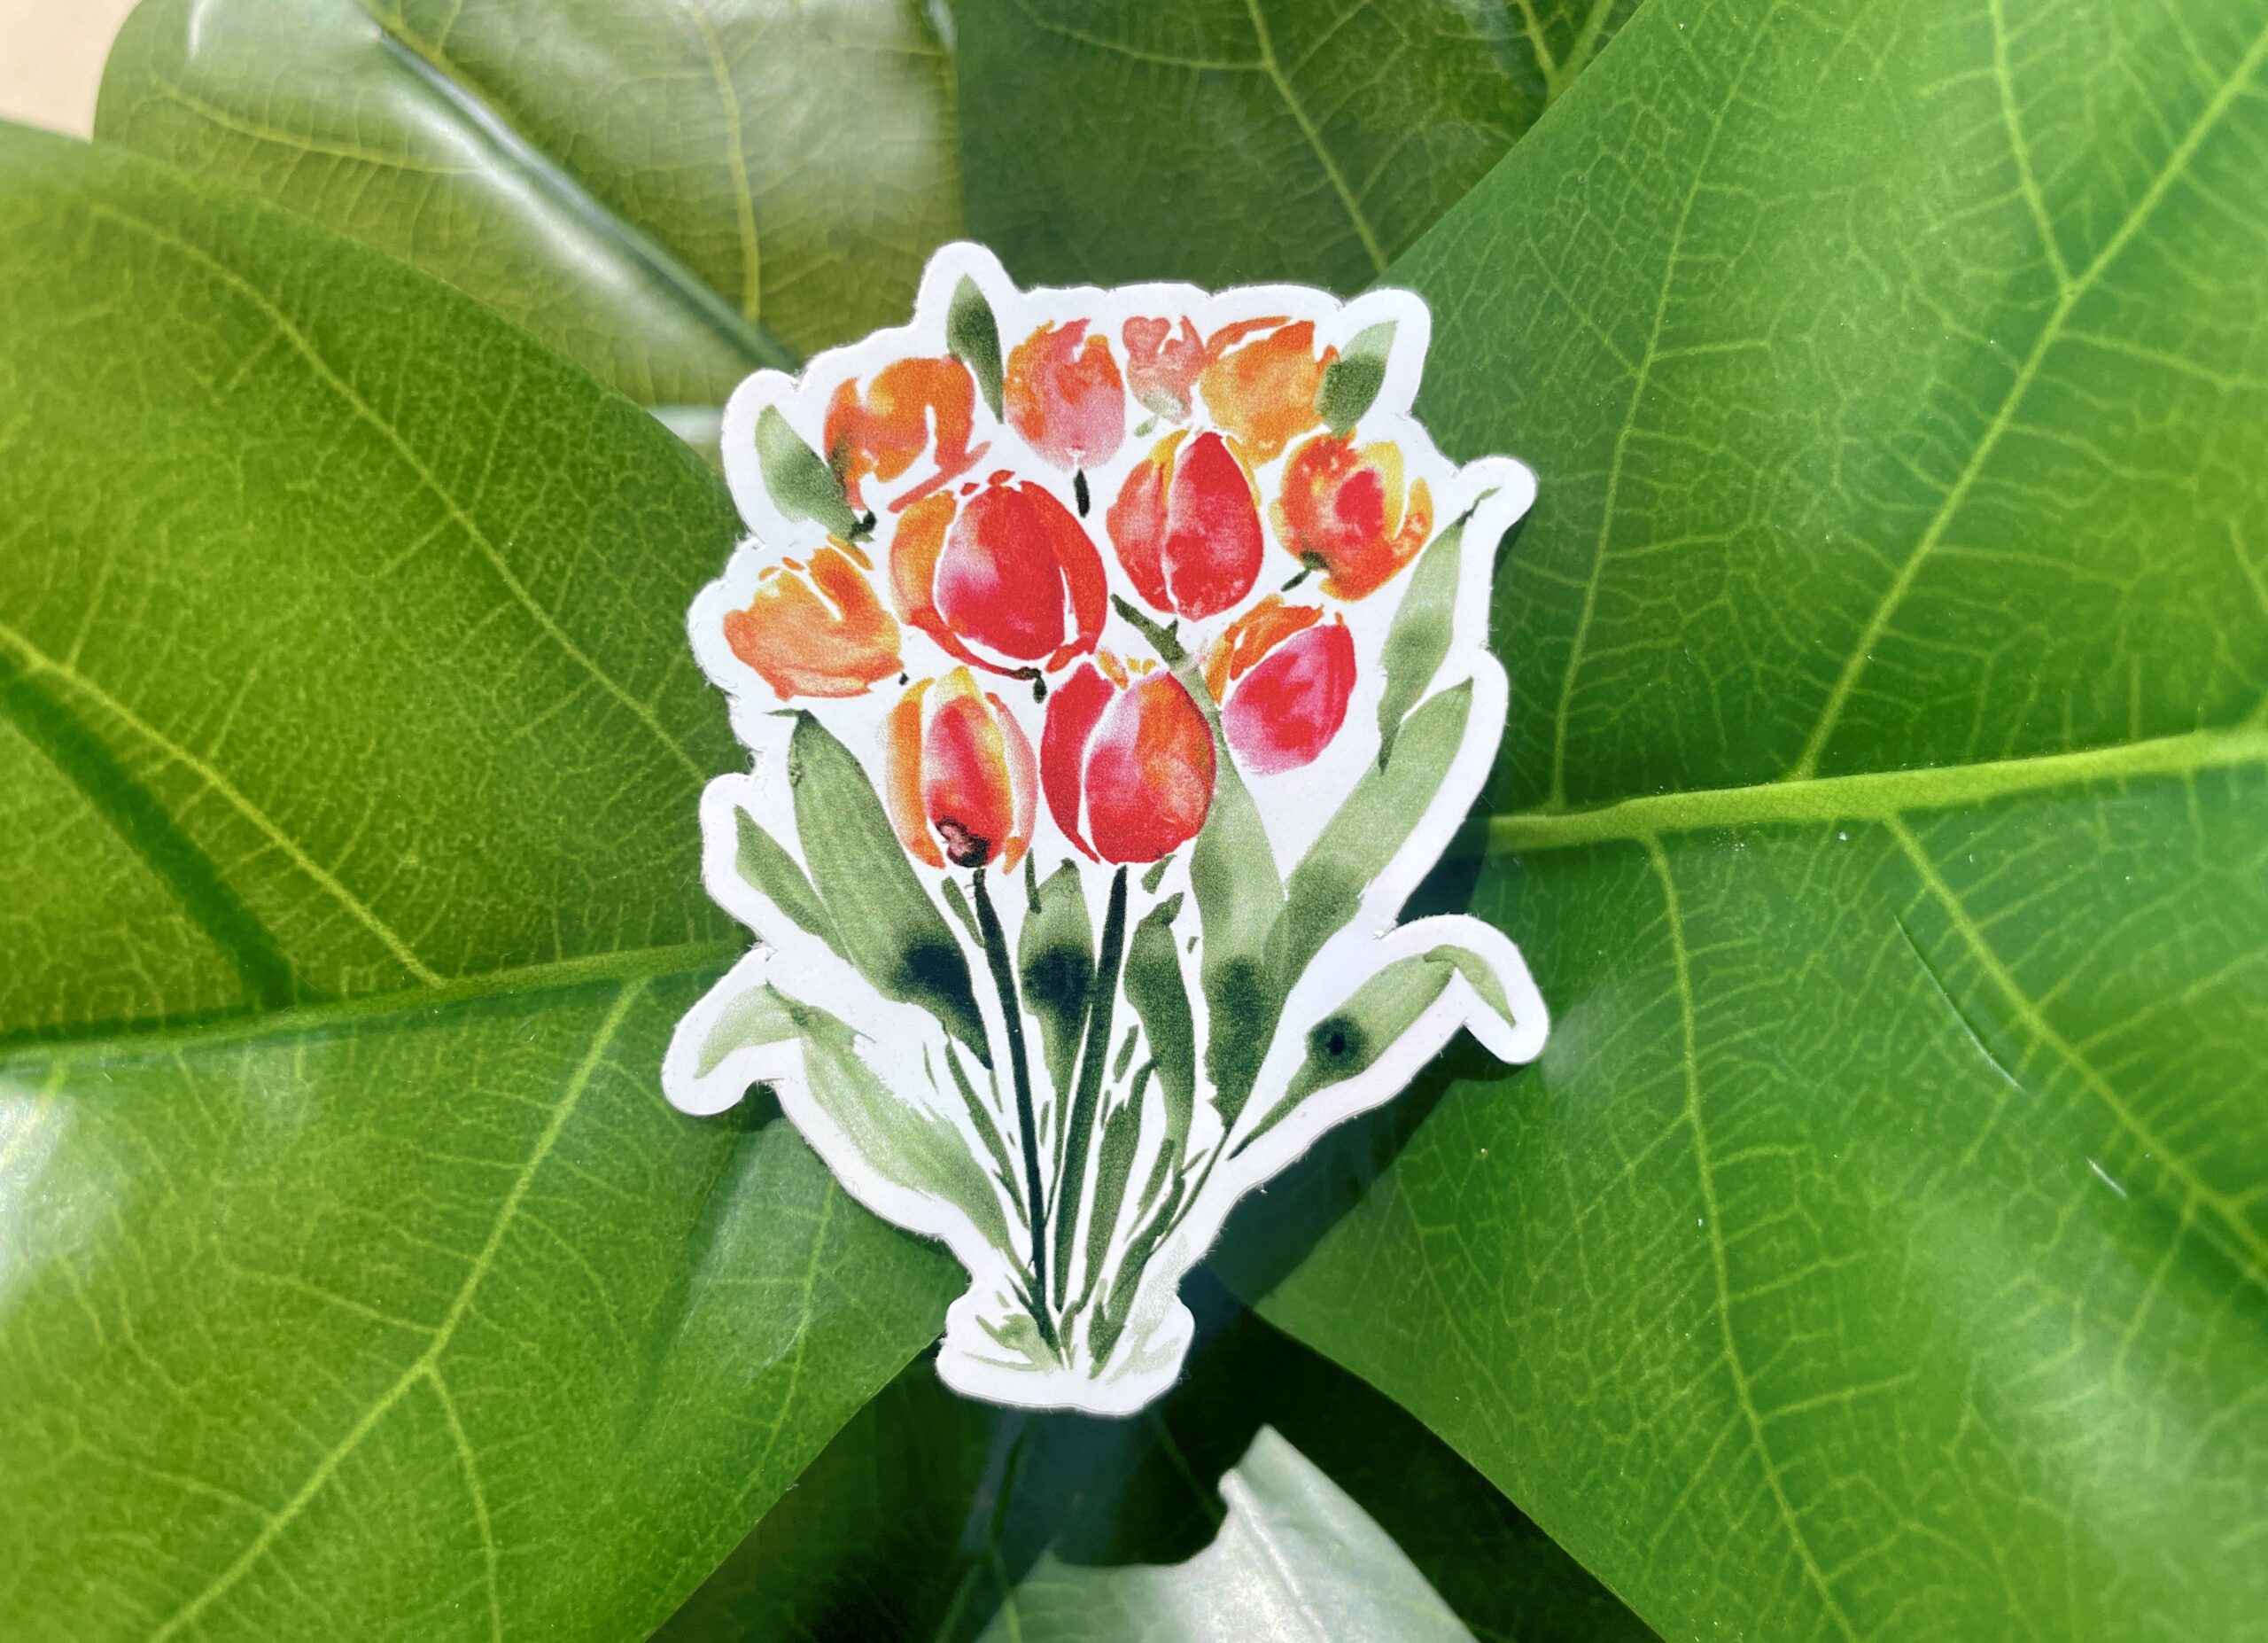 Tulips Aesthetic Stickers Flowers